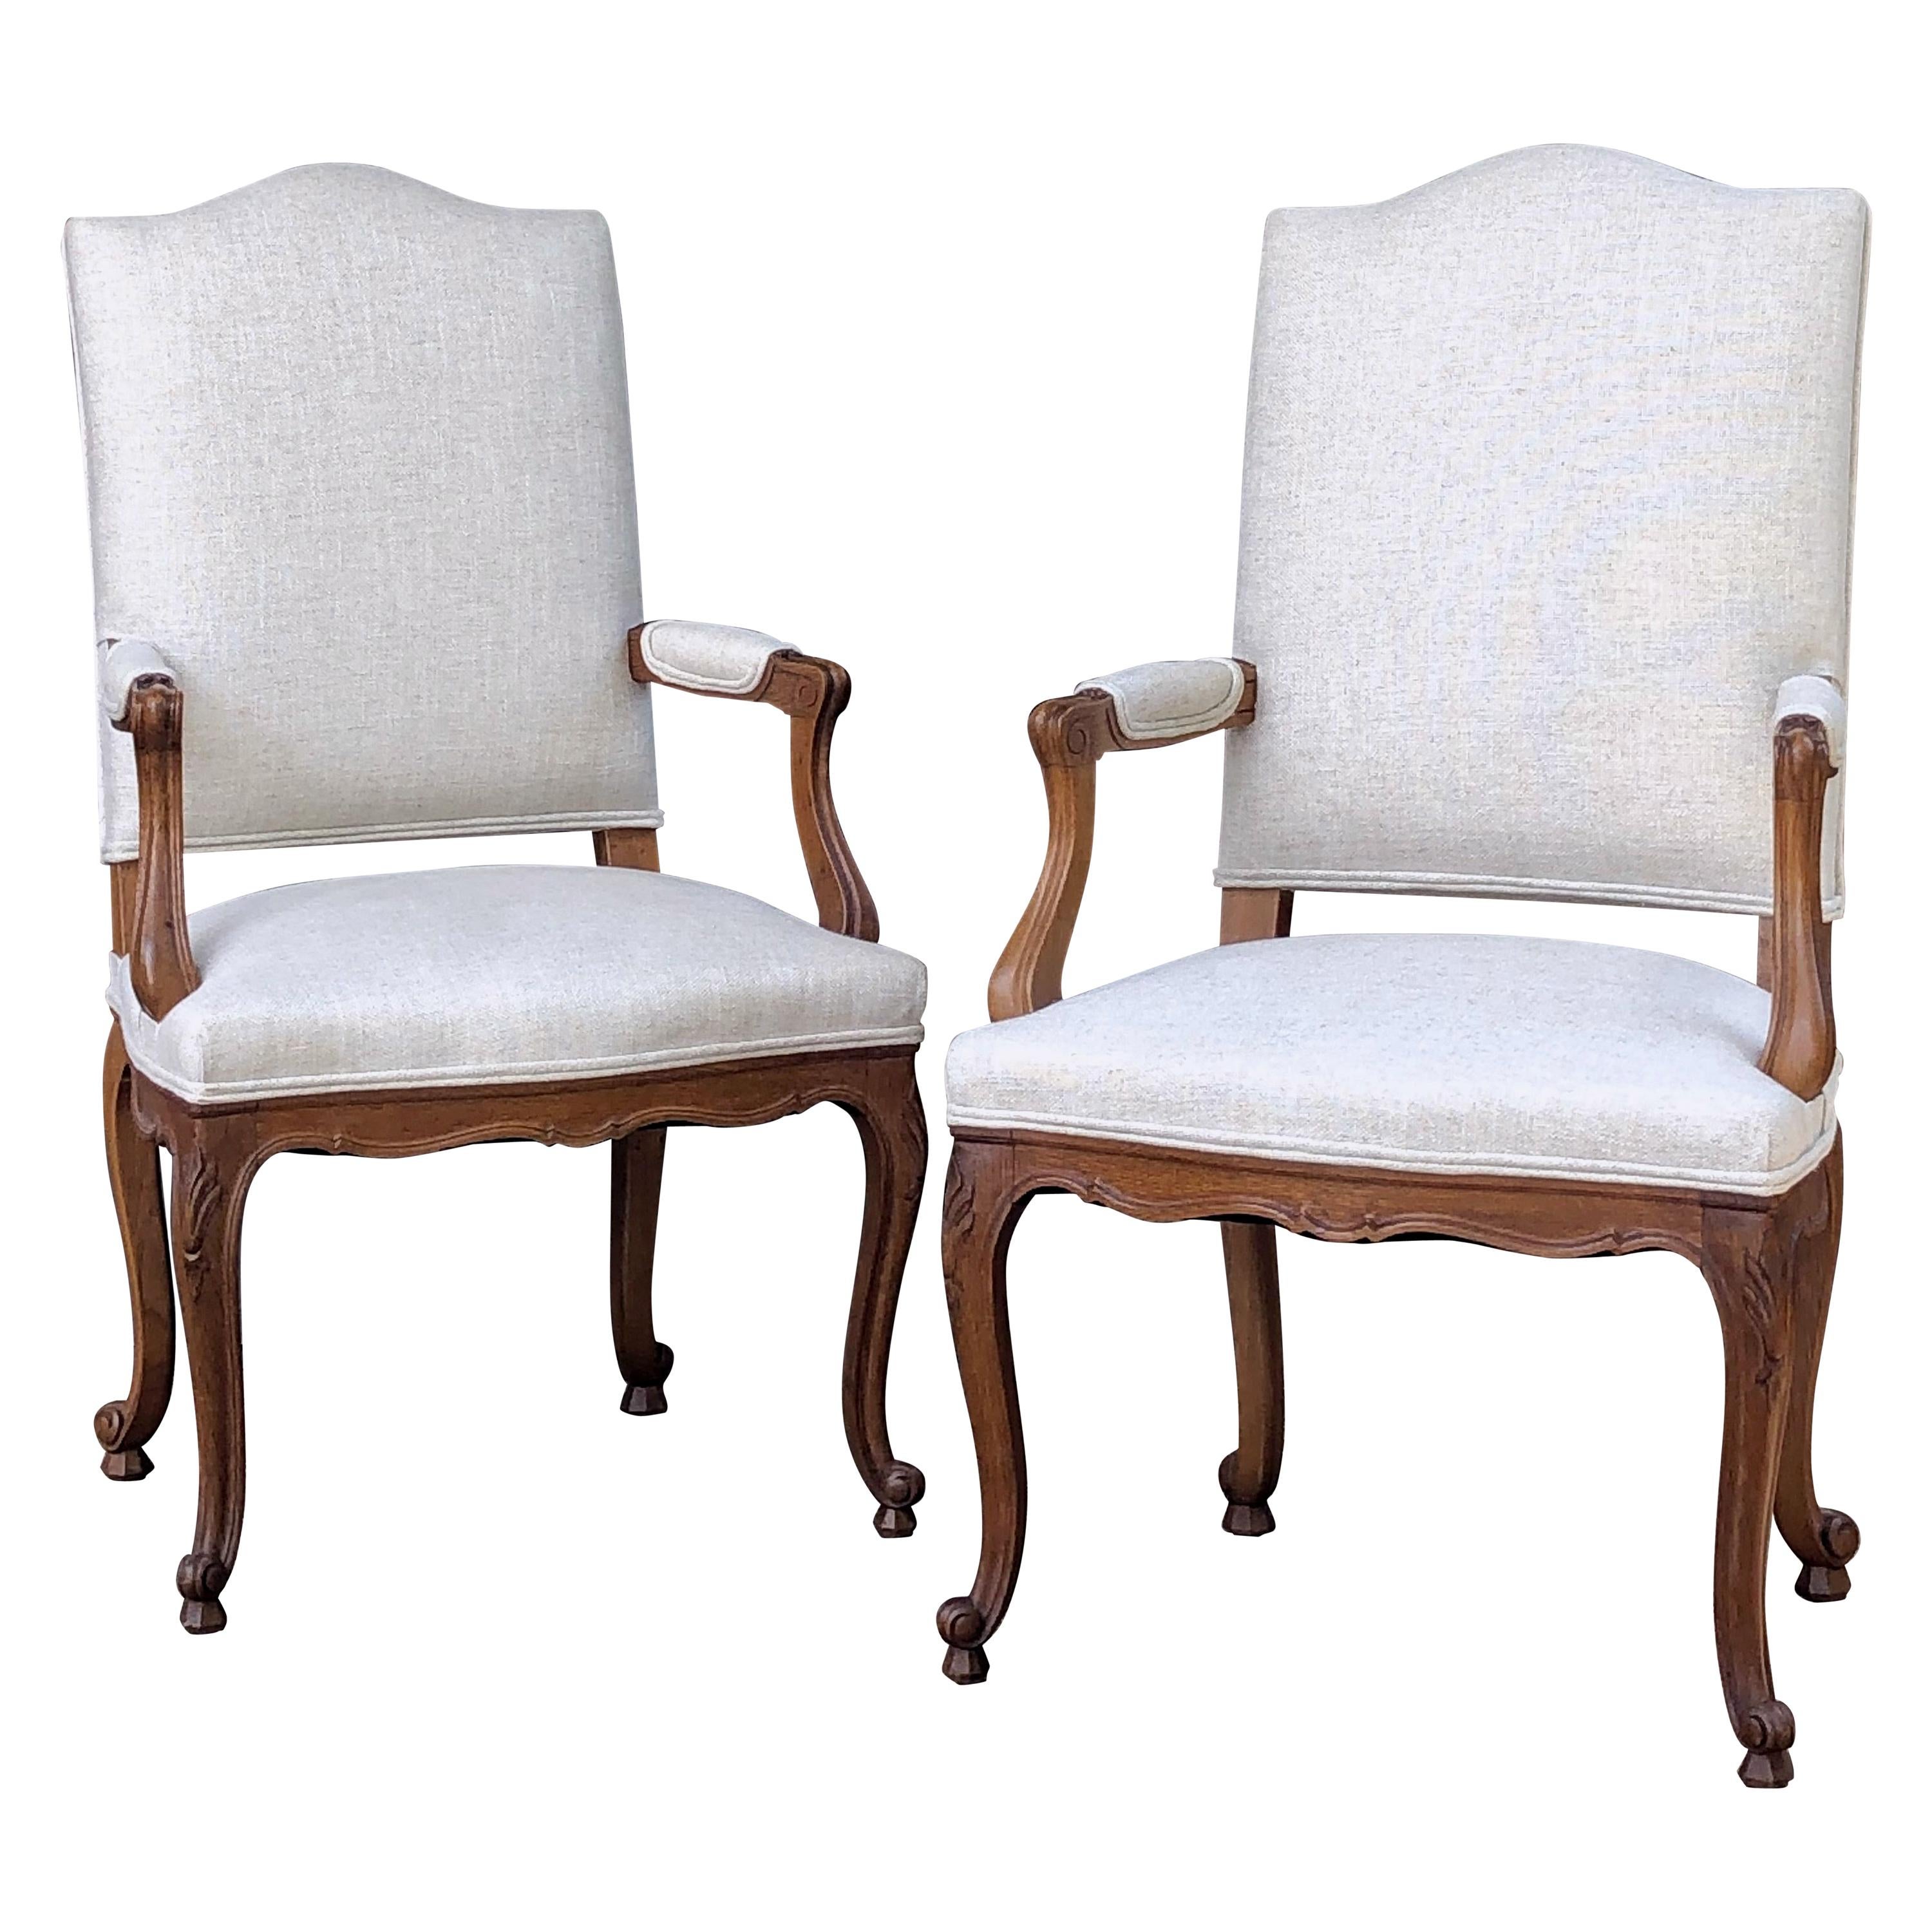 Pair of French Salon Chairs with Linen Upholstery 'Priced Individually'